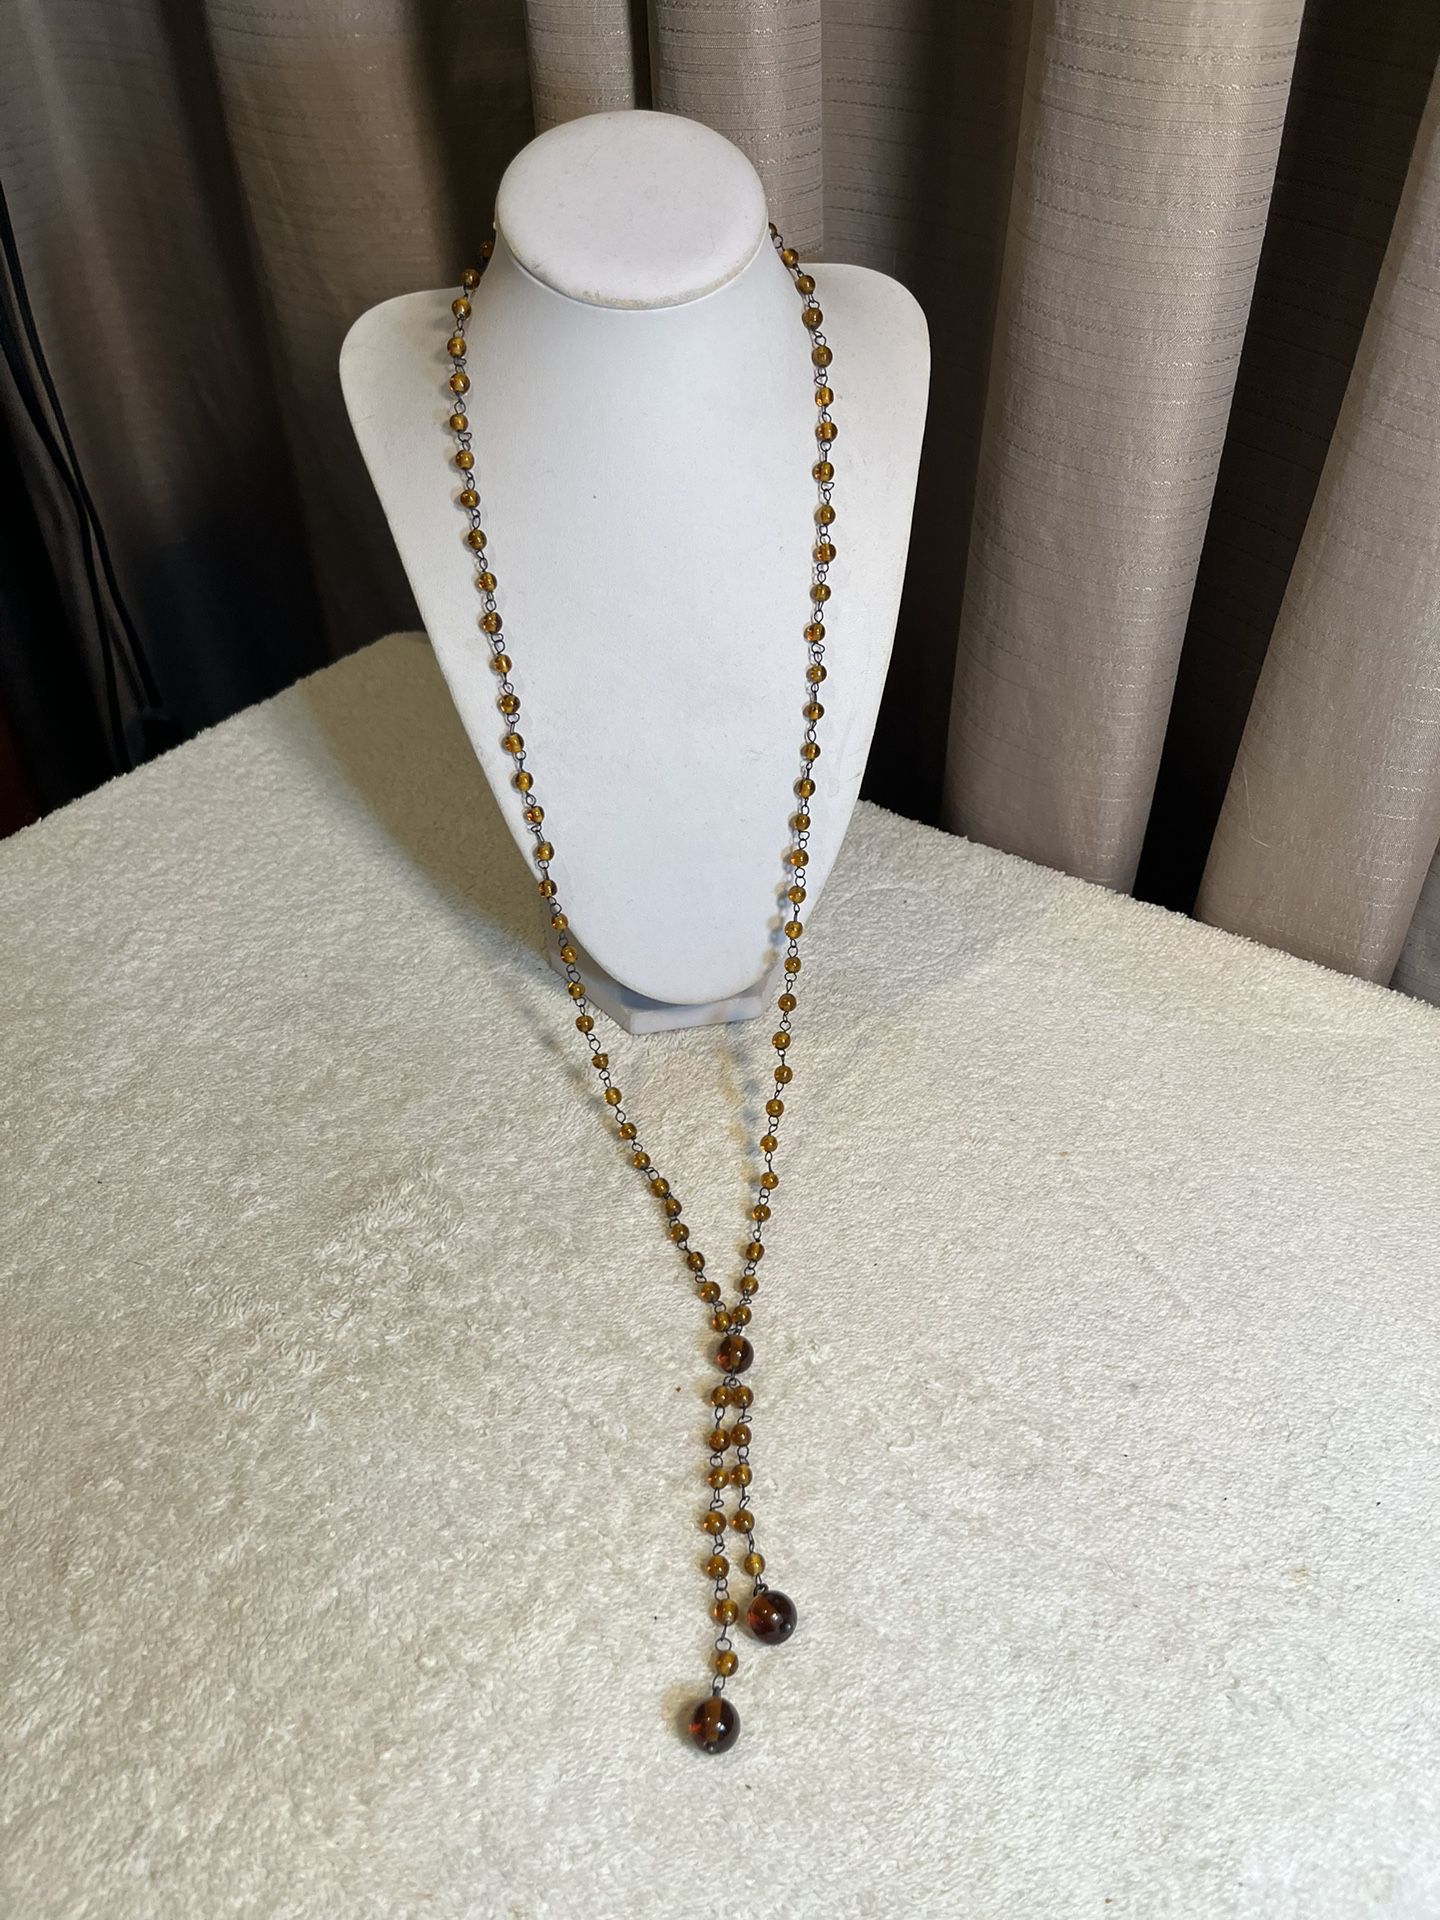 Vintage Amber Tone Glass Beaded Necklace With Tassel